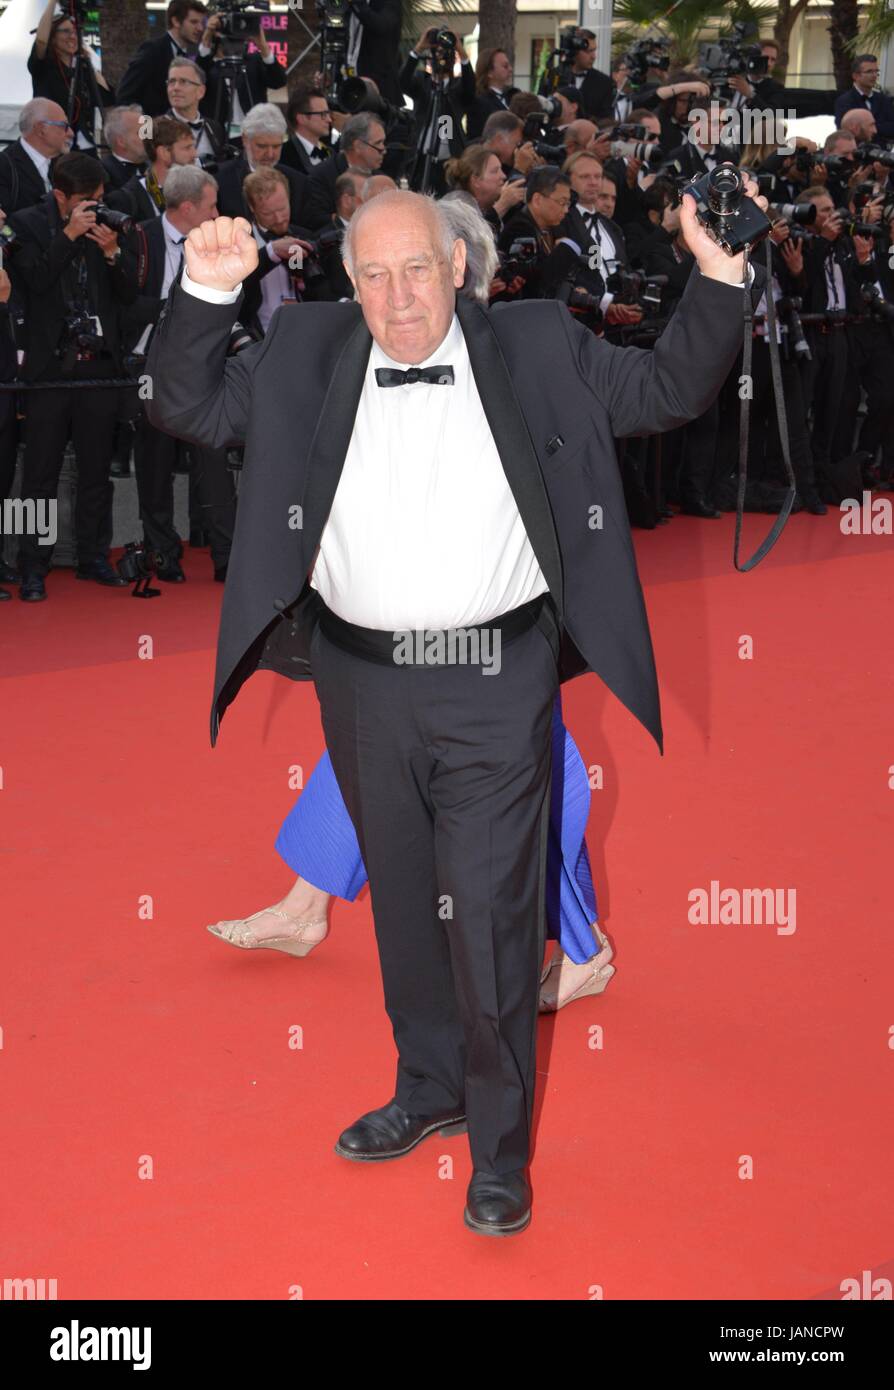 Raymond Depardon  Arriving on the red carpet for the 70th Cannes Film Festival celebrations  May 23, 2017 Photo Jacky Godard Stock Photo